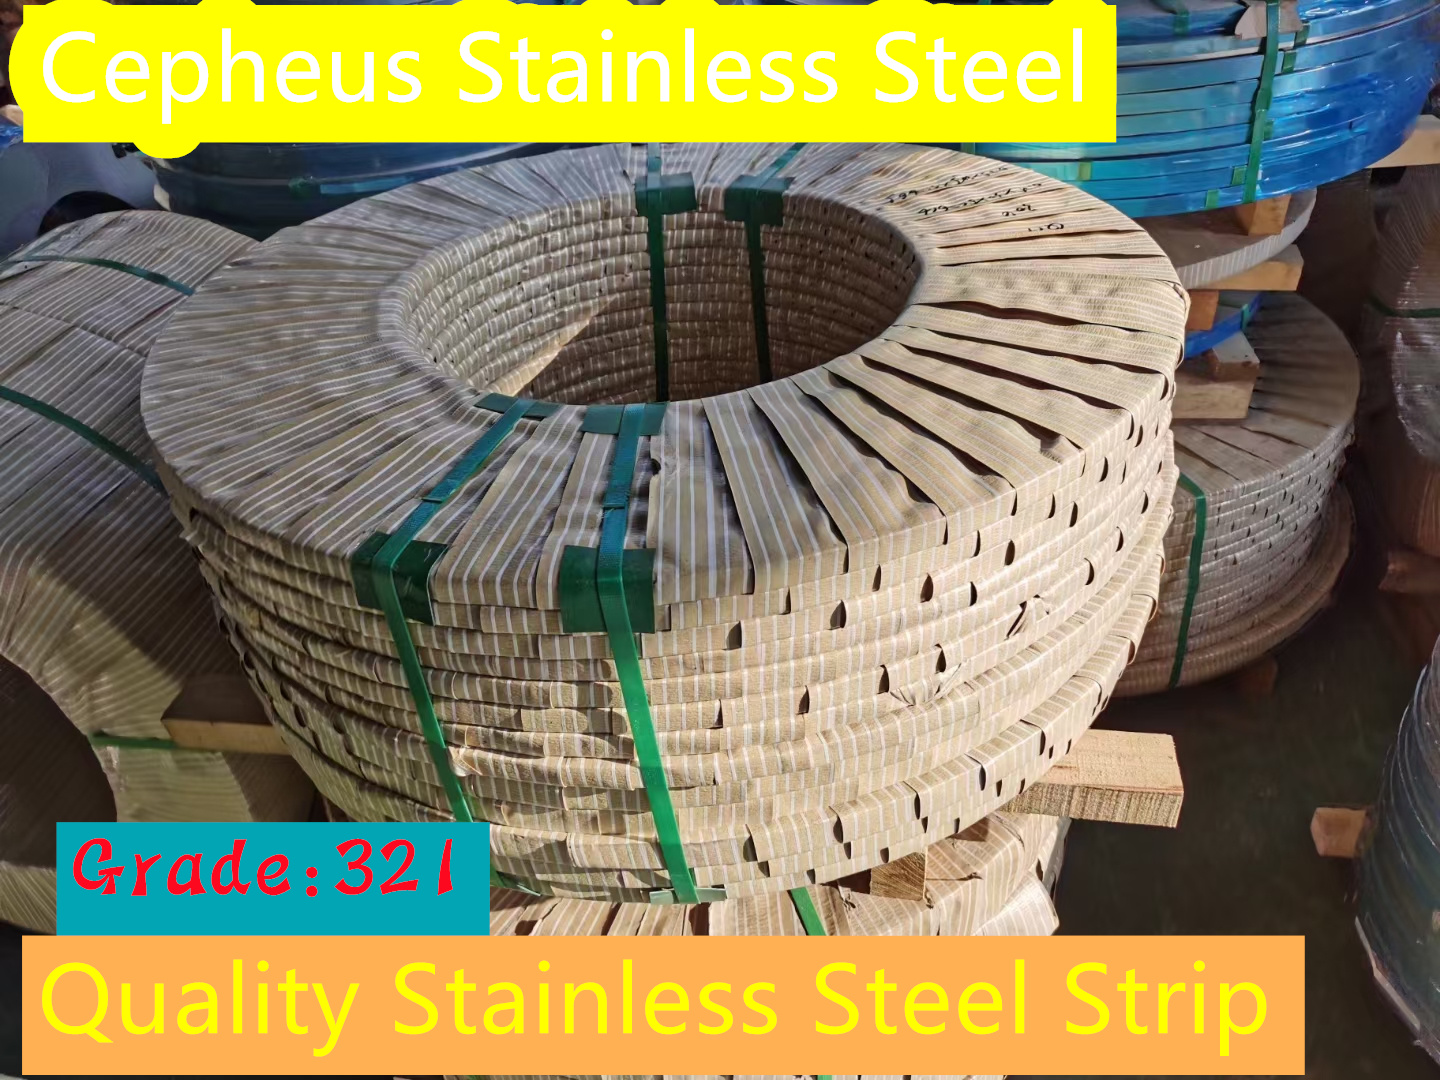 Factory made hot-sale Stainless Steel Bars - High quality 321 Stainless Steel Strips 0.7mm 0.8mm 1.0mm Cold Rolled SS Strip from China – Cepheus